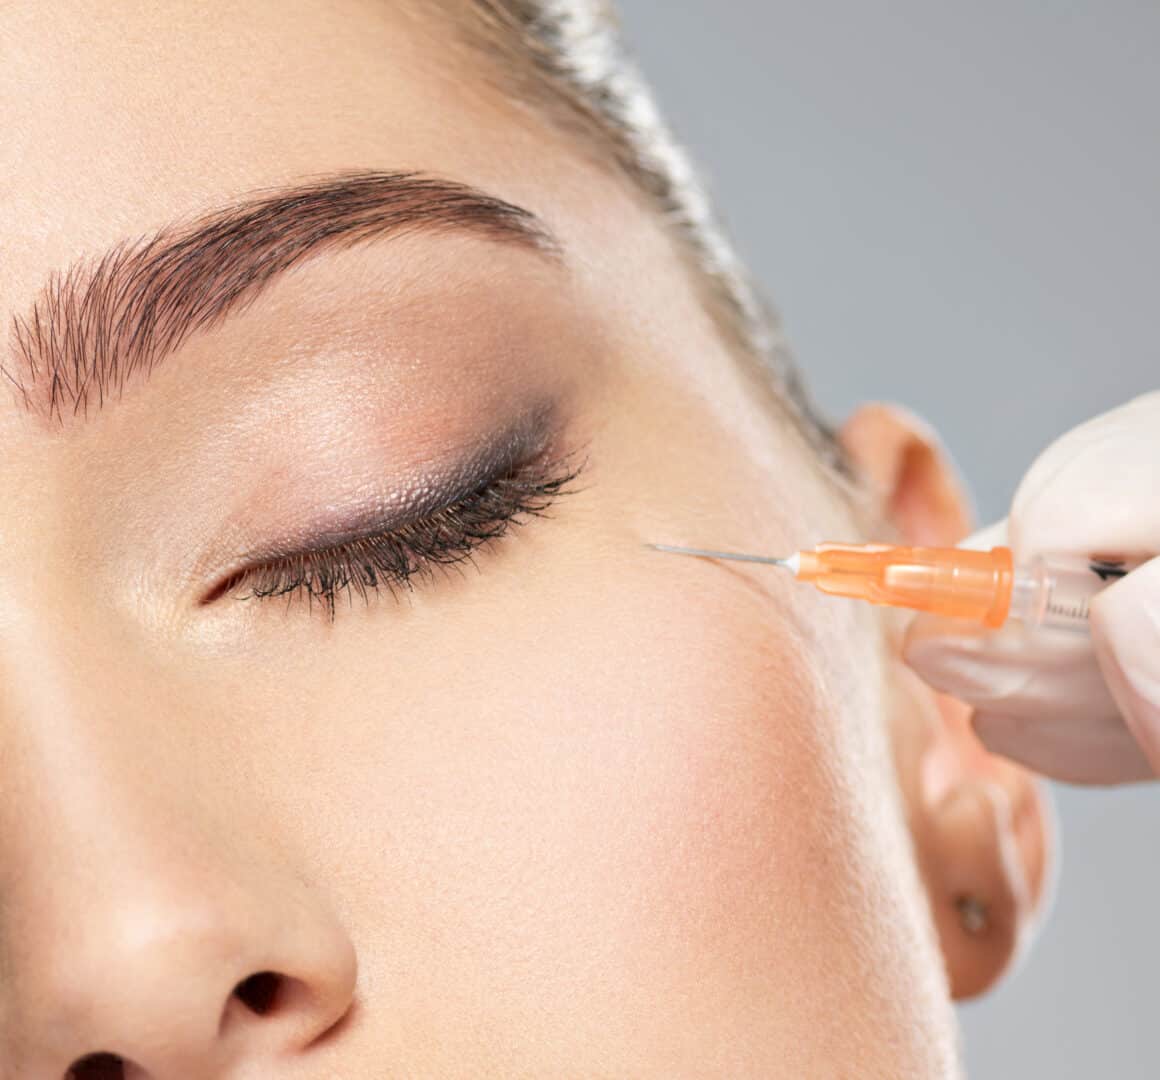 Cosmetic injectables